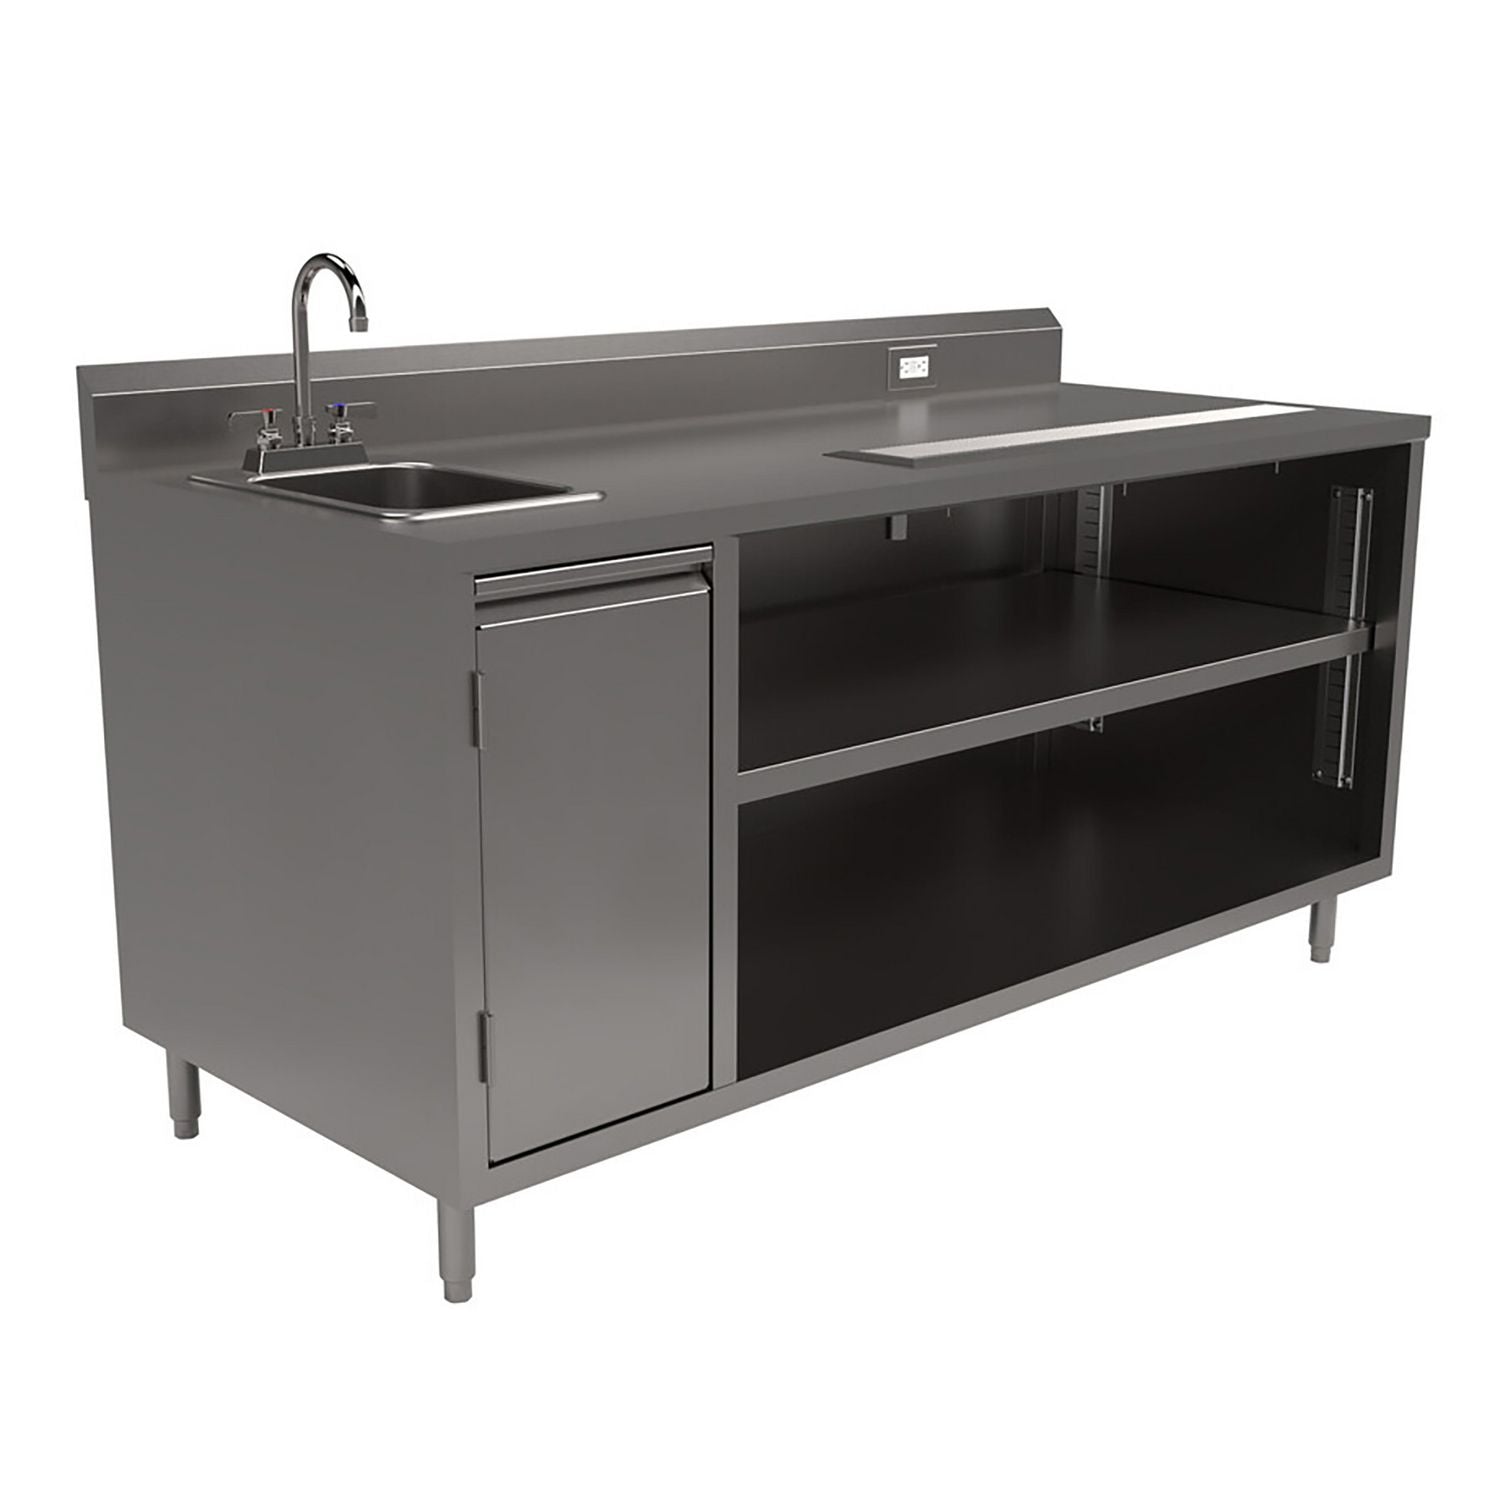 stainless-steel-beverage-table-with-left-sink-rectangular-30-x-72-x-415-silver-ships-in-4-6-business-days_bkebevt3072l - 2